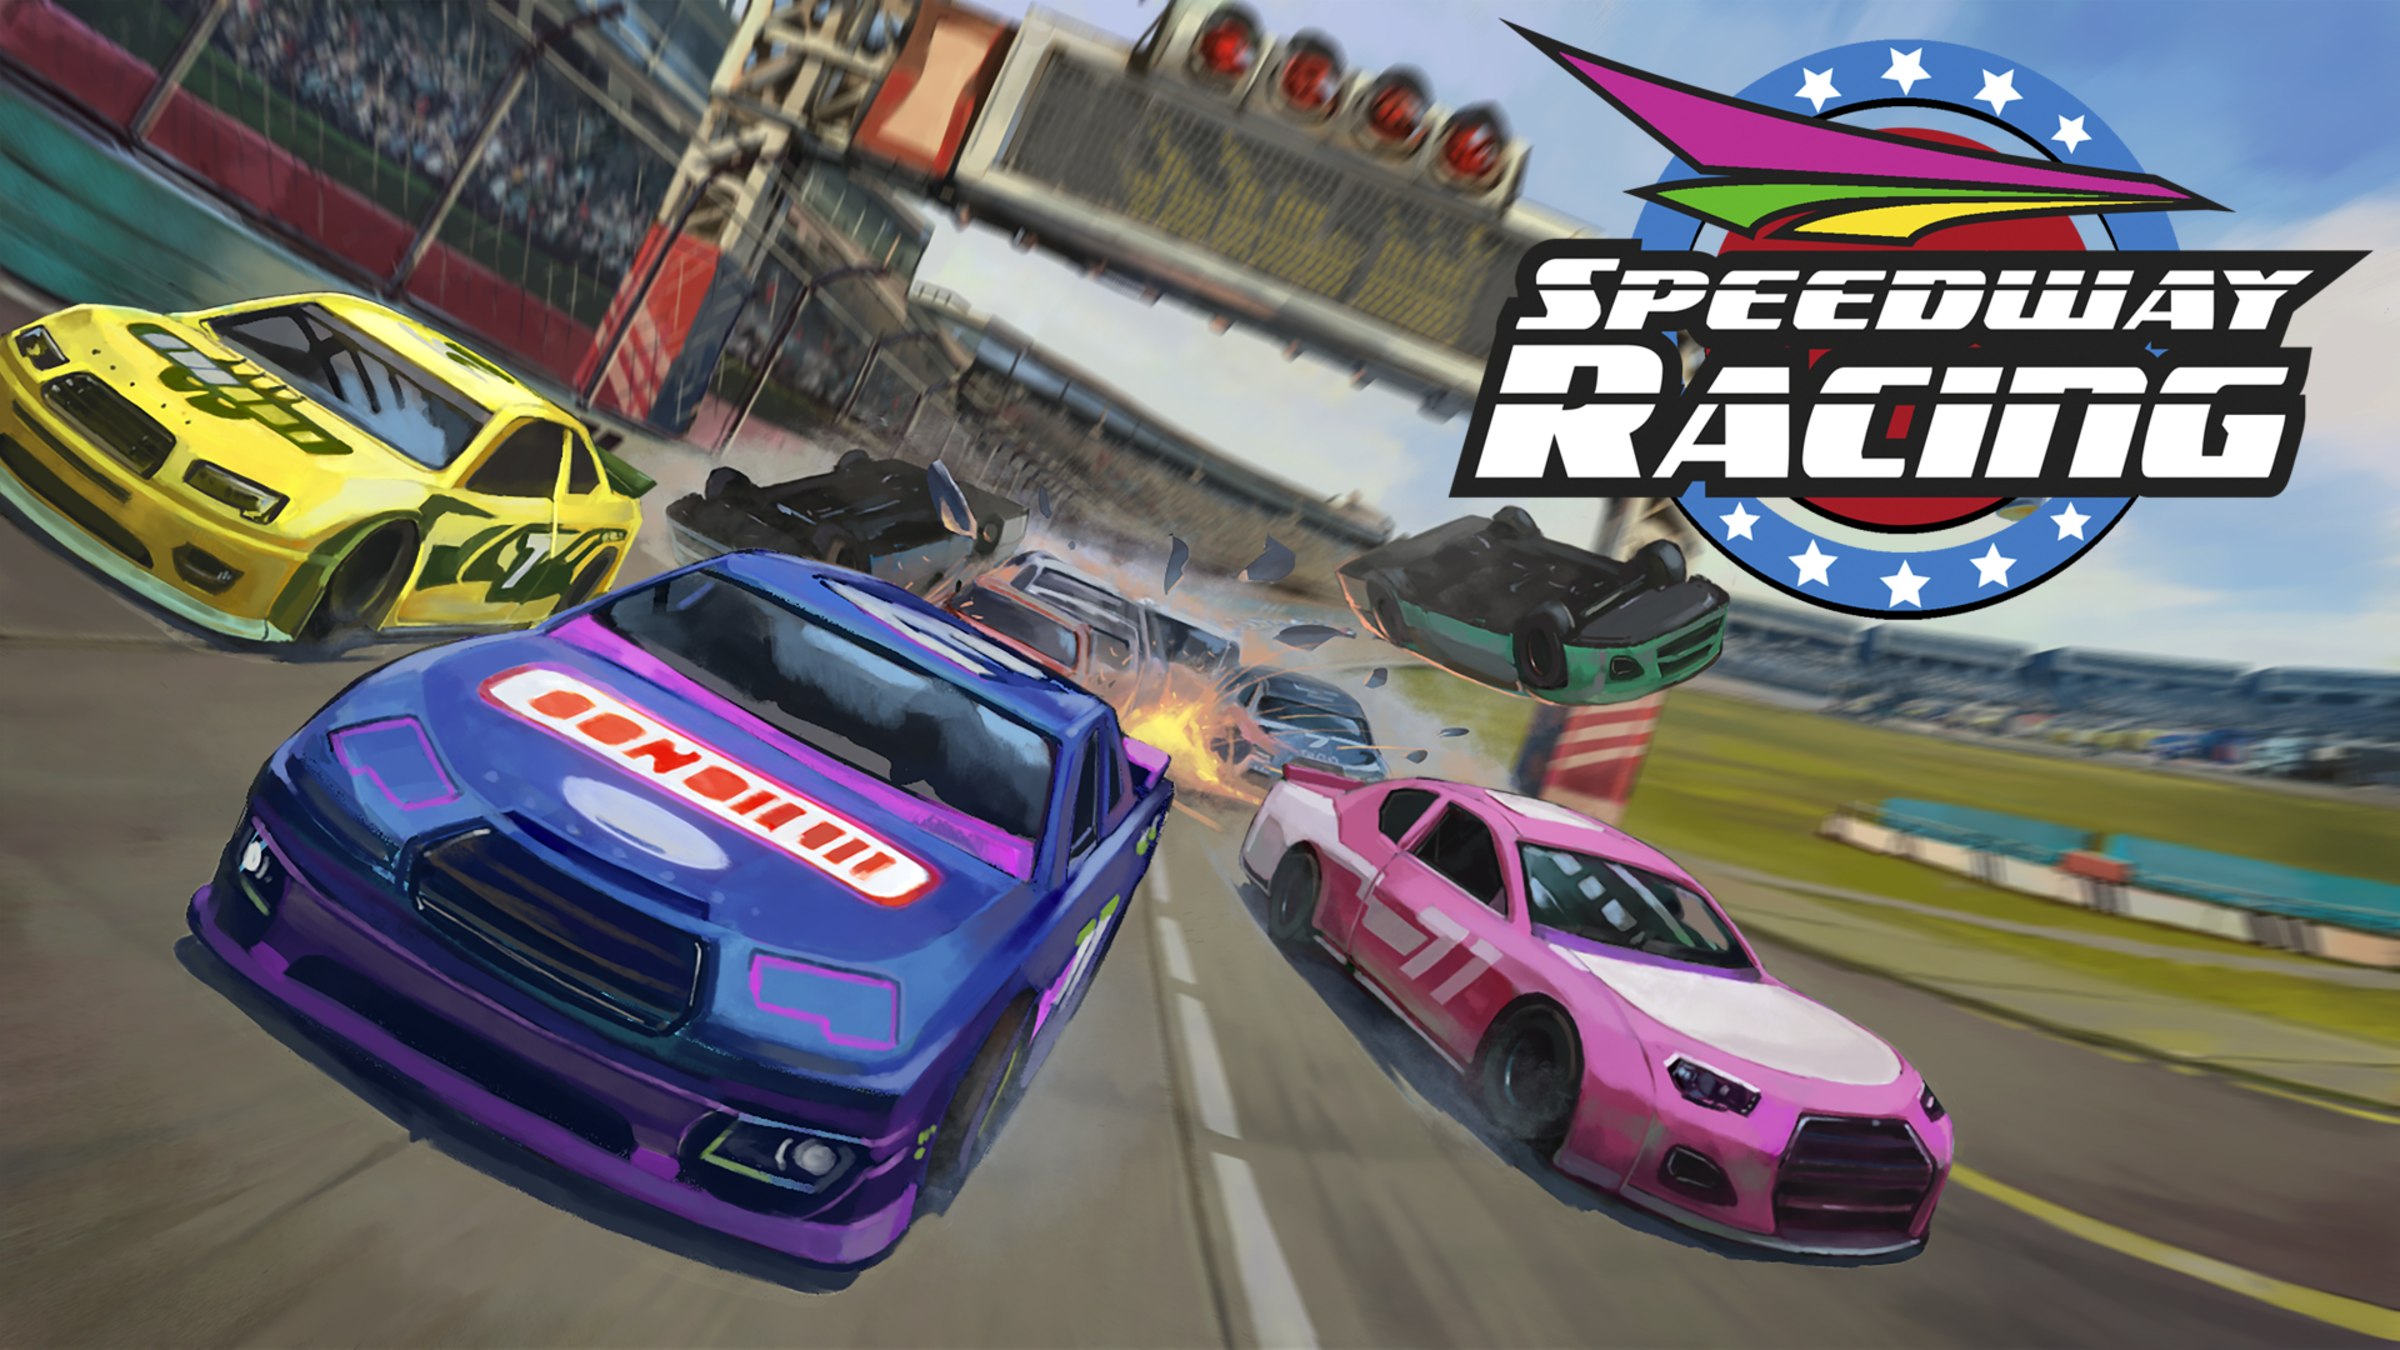 Speedway Racing for Nintendo Switch